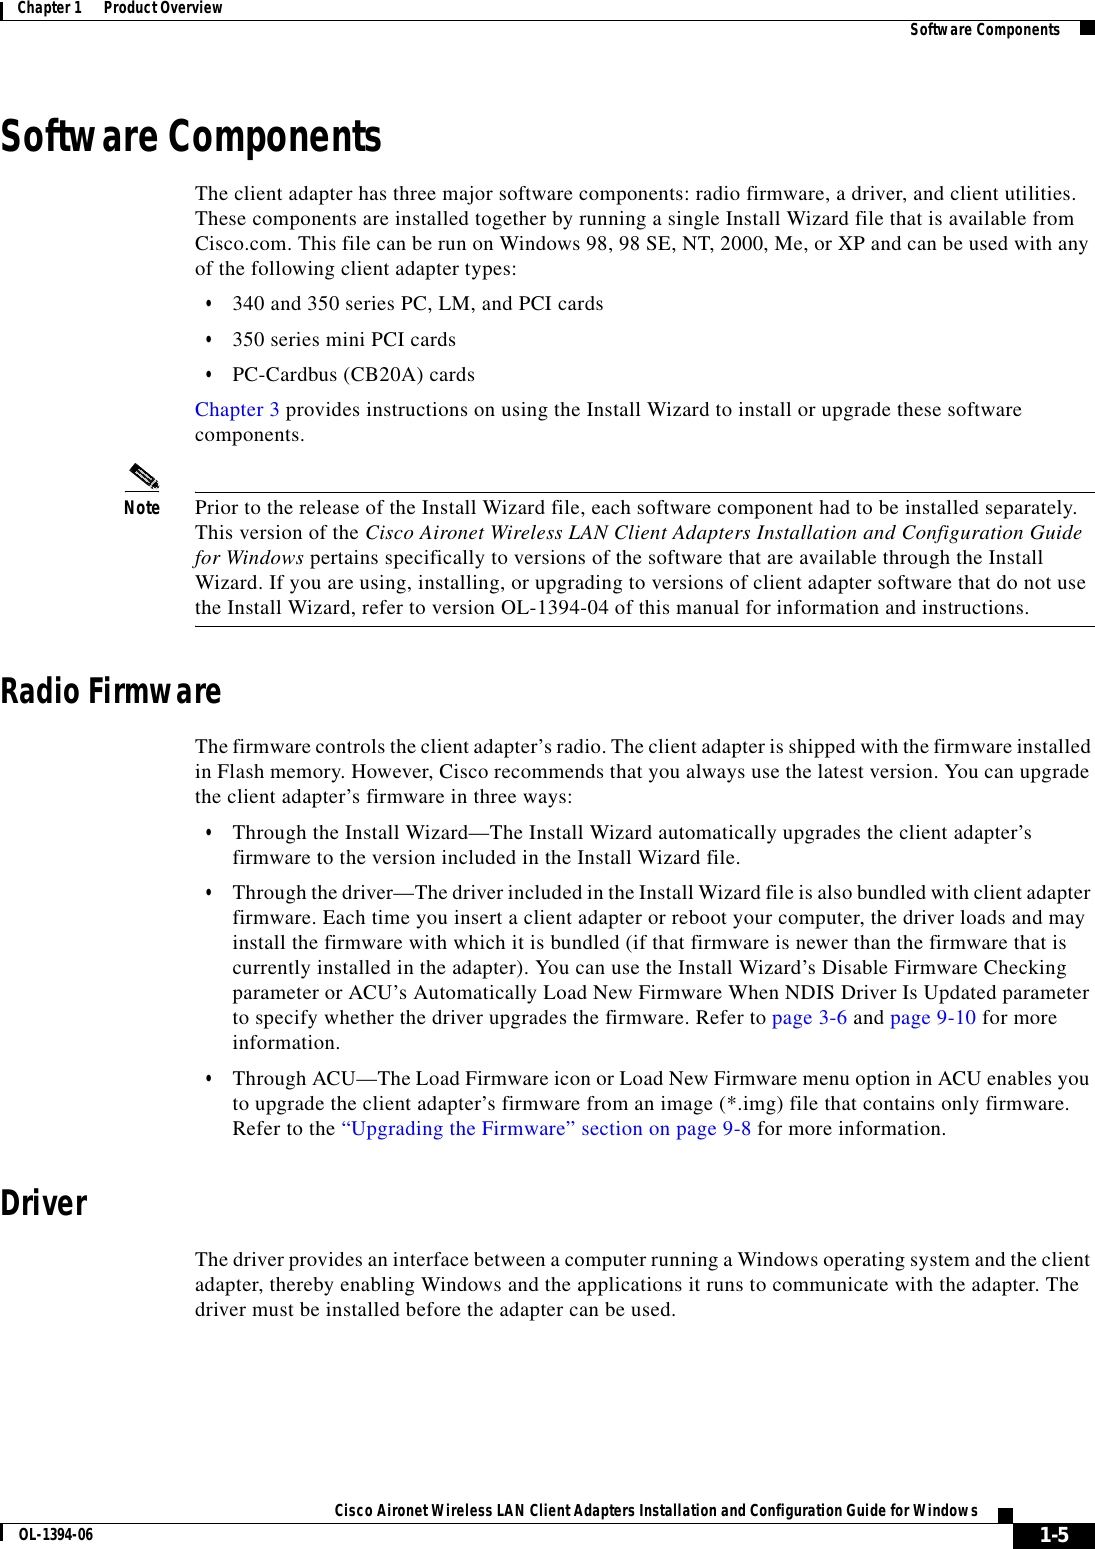 1-5Cisco Aironet Wireless LAN Client Adapters Installation and Configuration Guide for WindowsOL-1394-06Chapter 1      Product Overview Software ComponentsSoftware ComponentsThe client adapter has three major software components: radio firmware, a driver, and client utilities. These components are installed together by running a single Install Wizard file that is available from Cisco.com. This file can be run on Windows 98, 98 SE, NT, 2000, Me, or XP and can be used with any of the following client adapter types:•340 and 350 series PC, LM, and PCI cards•350 series mini PCI cards•PC-Cardbus (CB20A) cardsChapter 3 provides instructions on using the Install Wizard to install or upgrade these software components.Note Prior to the release of the Install Wizard file, each software component had to be installed separately. This version of the Cisco Aironet Wireless LAN Client Adapters Installation and Configuration Guide for Windows pertains specifically to versions of the software that are available through the Install Wizard. If you are using, installing, or upgrading to versions of client adapter software that do not use the Install Wizard, refer to version OL-1394-04 of this manual for information and instructions.Radio FirmwareThe firmware controls the client adapter’s radio. The client adapter is shipped with the firmware installed in Flash memory. However, Cisco recommends that you always use the latest version. You can upgrade the client adapter’s firmware in three ways:•Through the Install Wizard—The Install Wizard automatically upgrades the client adapter’s firmware to the version included in the Install Wizard file.•Through the driver—The driver included in the Install Wizard file is also bundled with client adapter firmware. Each time you insert a client adapter or reboot your computer, the driver loads and may install the firmware with which it is bundled (if that firmware is newer than the firmware that is currently installed in the adapter). You can use the Install Wizard’s Disable Firmware Checking parameter or ACU’s Automatically Load New Firmware When NDIS Driver Is Updated parameter to specify whether the driver upgrades the firmware. Refer to page 3-6 and page 9-10 for more information.•Through ACU—The Load Firmware icon or Load New Firmware menu option in ACU enables you to upgrade the client adapter’s firmware from an image (*.img) file that contains only firmware. Refer to the “Upgrading the Firmware” section on page 9-8 for more information.DriverThe driver provides an interface between a computer running a Windows operating system and the client adapter, thereby enabling Windows and the applications it runs to communicate with the adapter. The driver must be installed before the adapter can be used.